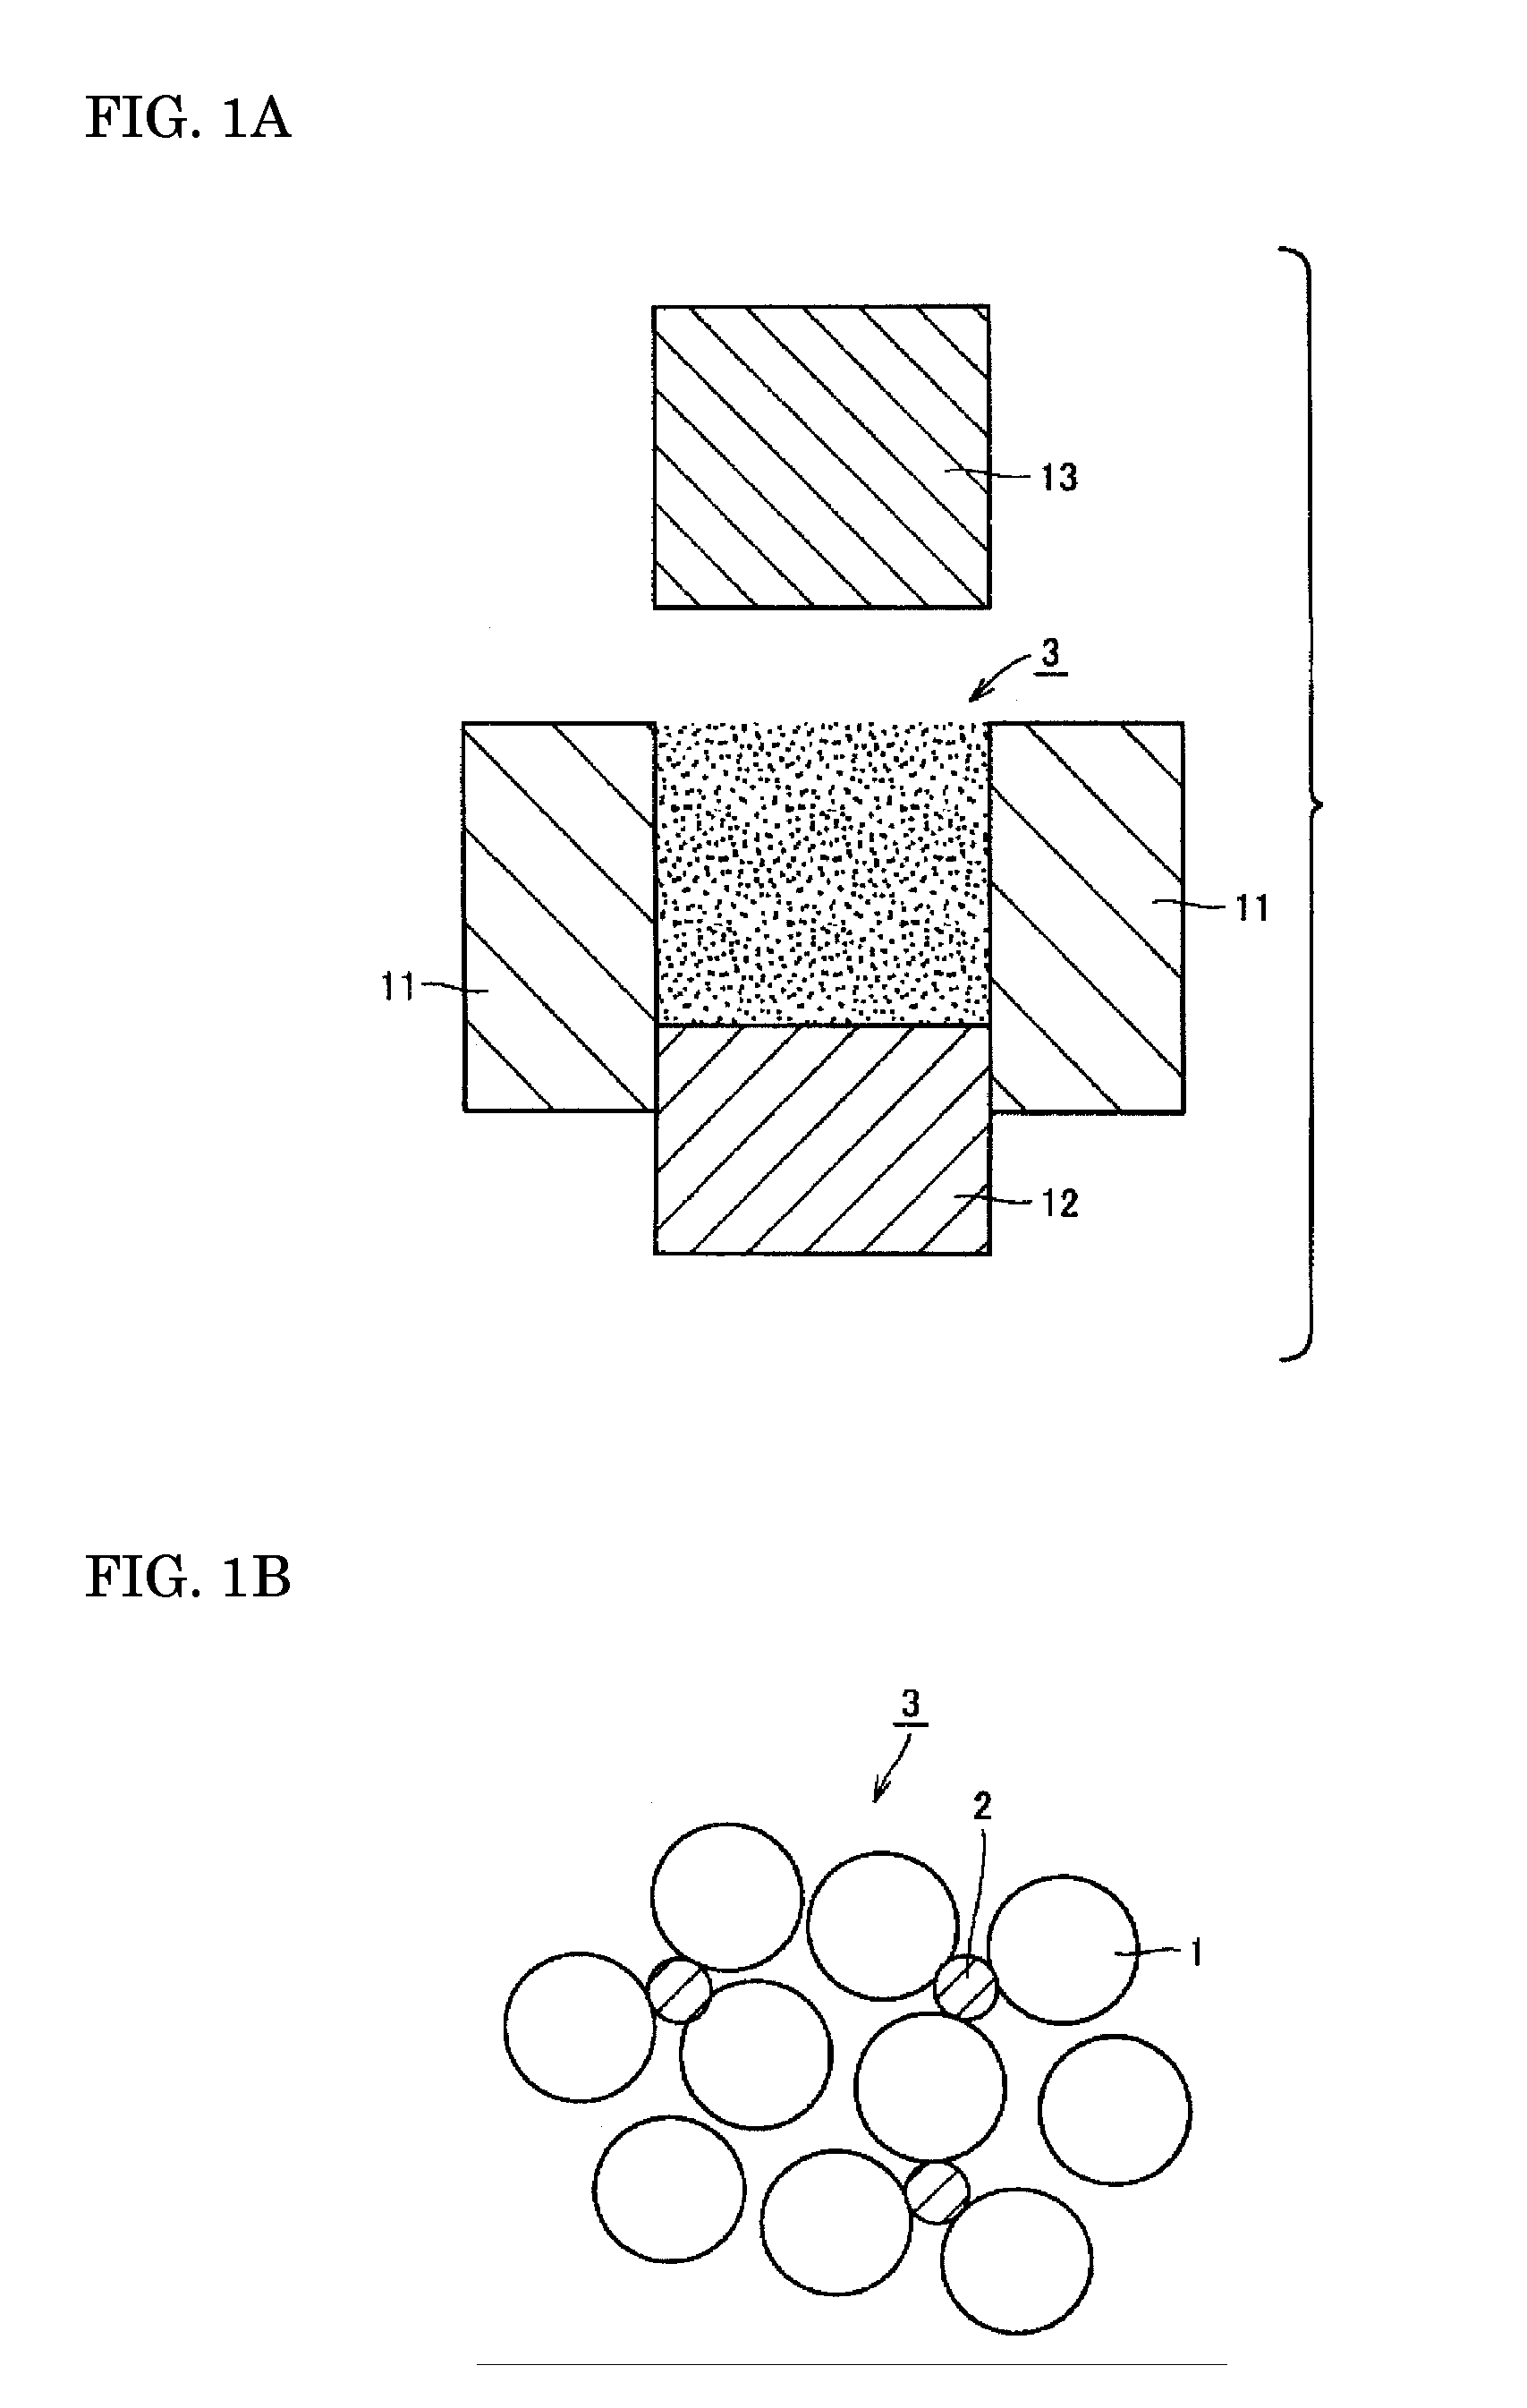 Method for Molding Powder in Powder Metallurgy and Method for Producing Sintered Parts